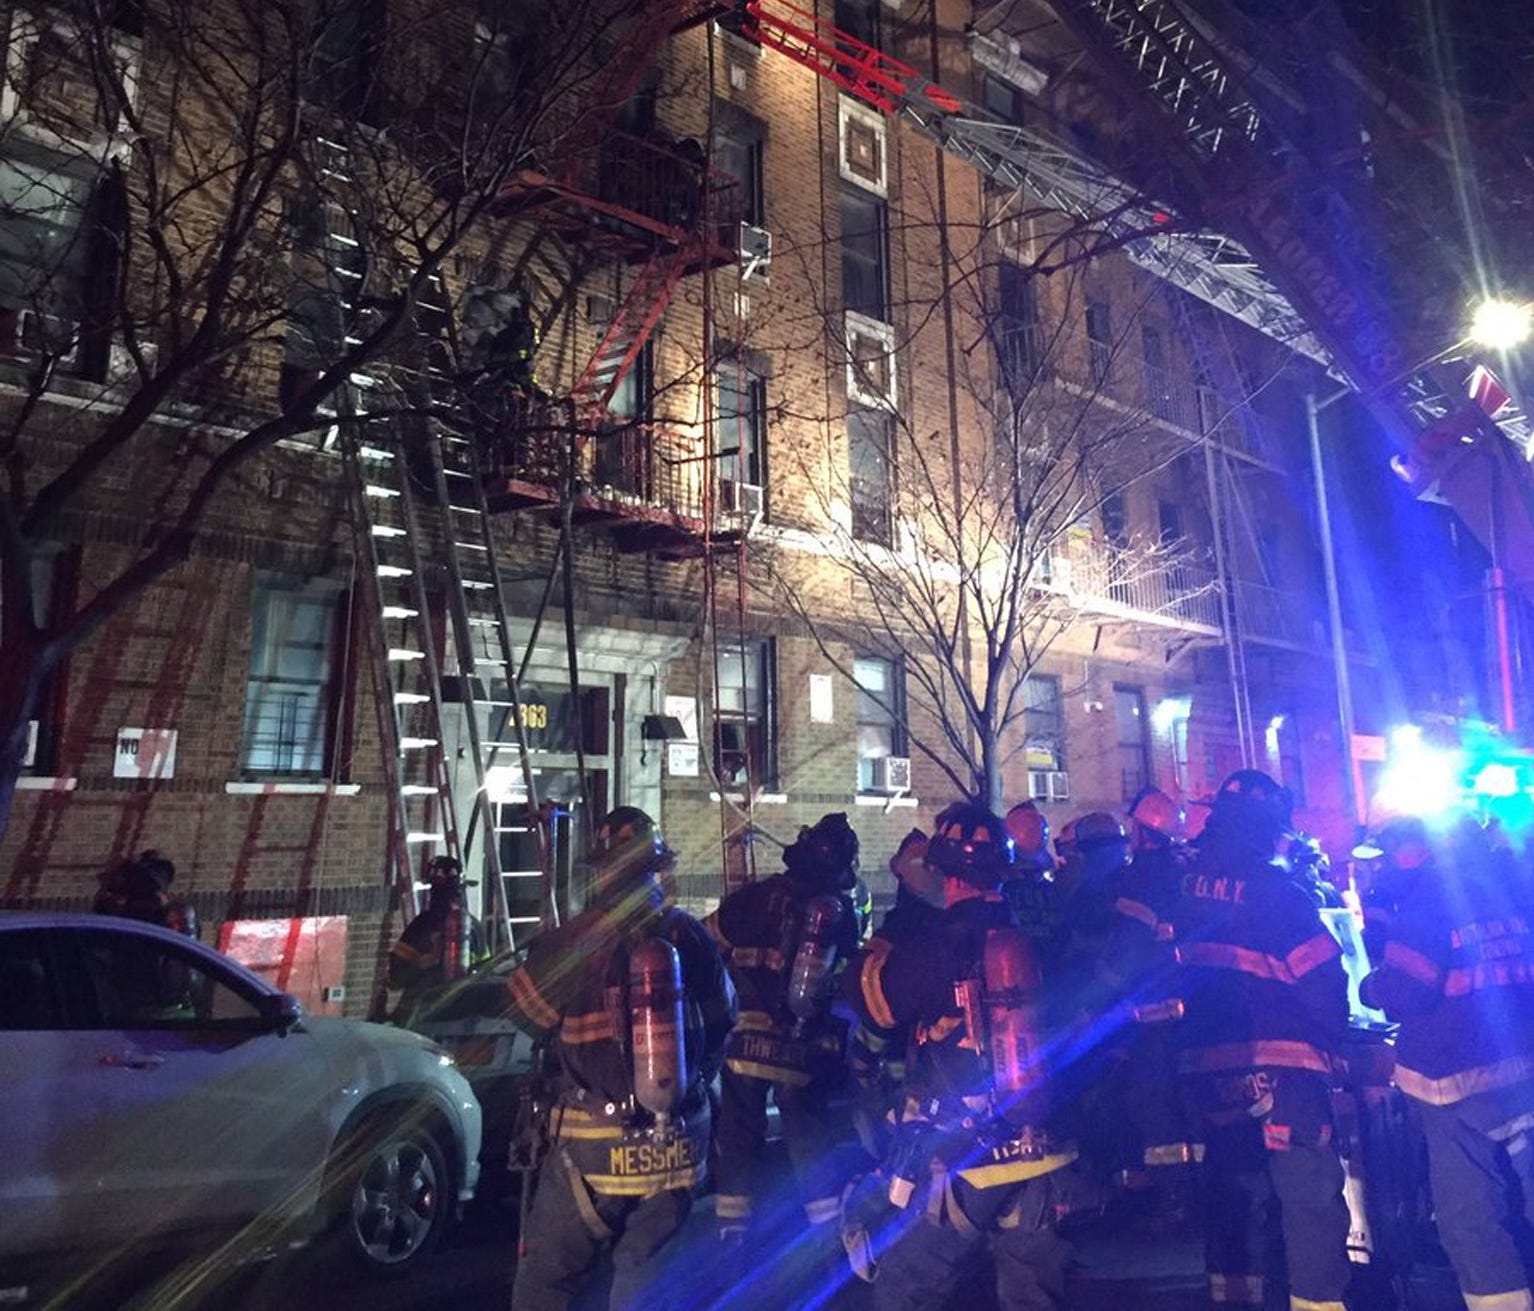 A handout photo made available by the Fire Department of the City of New York shows firefighters operating at the scene of a four-alarm fire at an apartment building in the Bronx borough of New York, on Dec. 28, 2017.